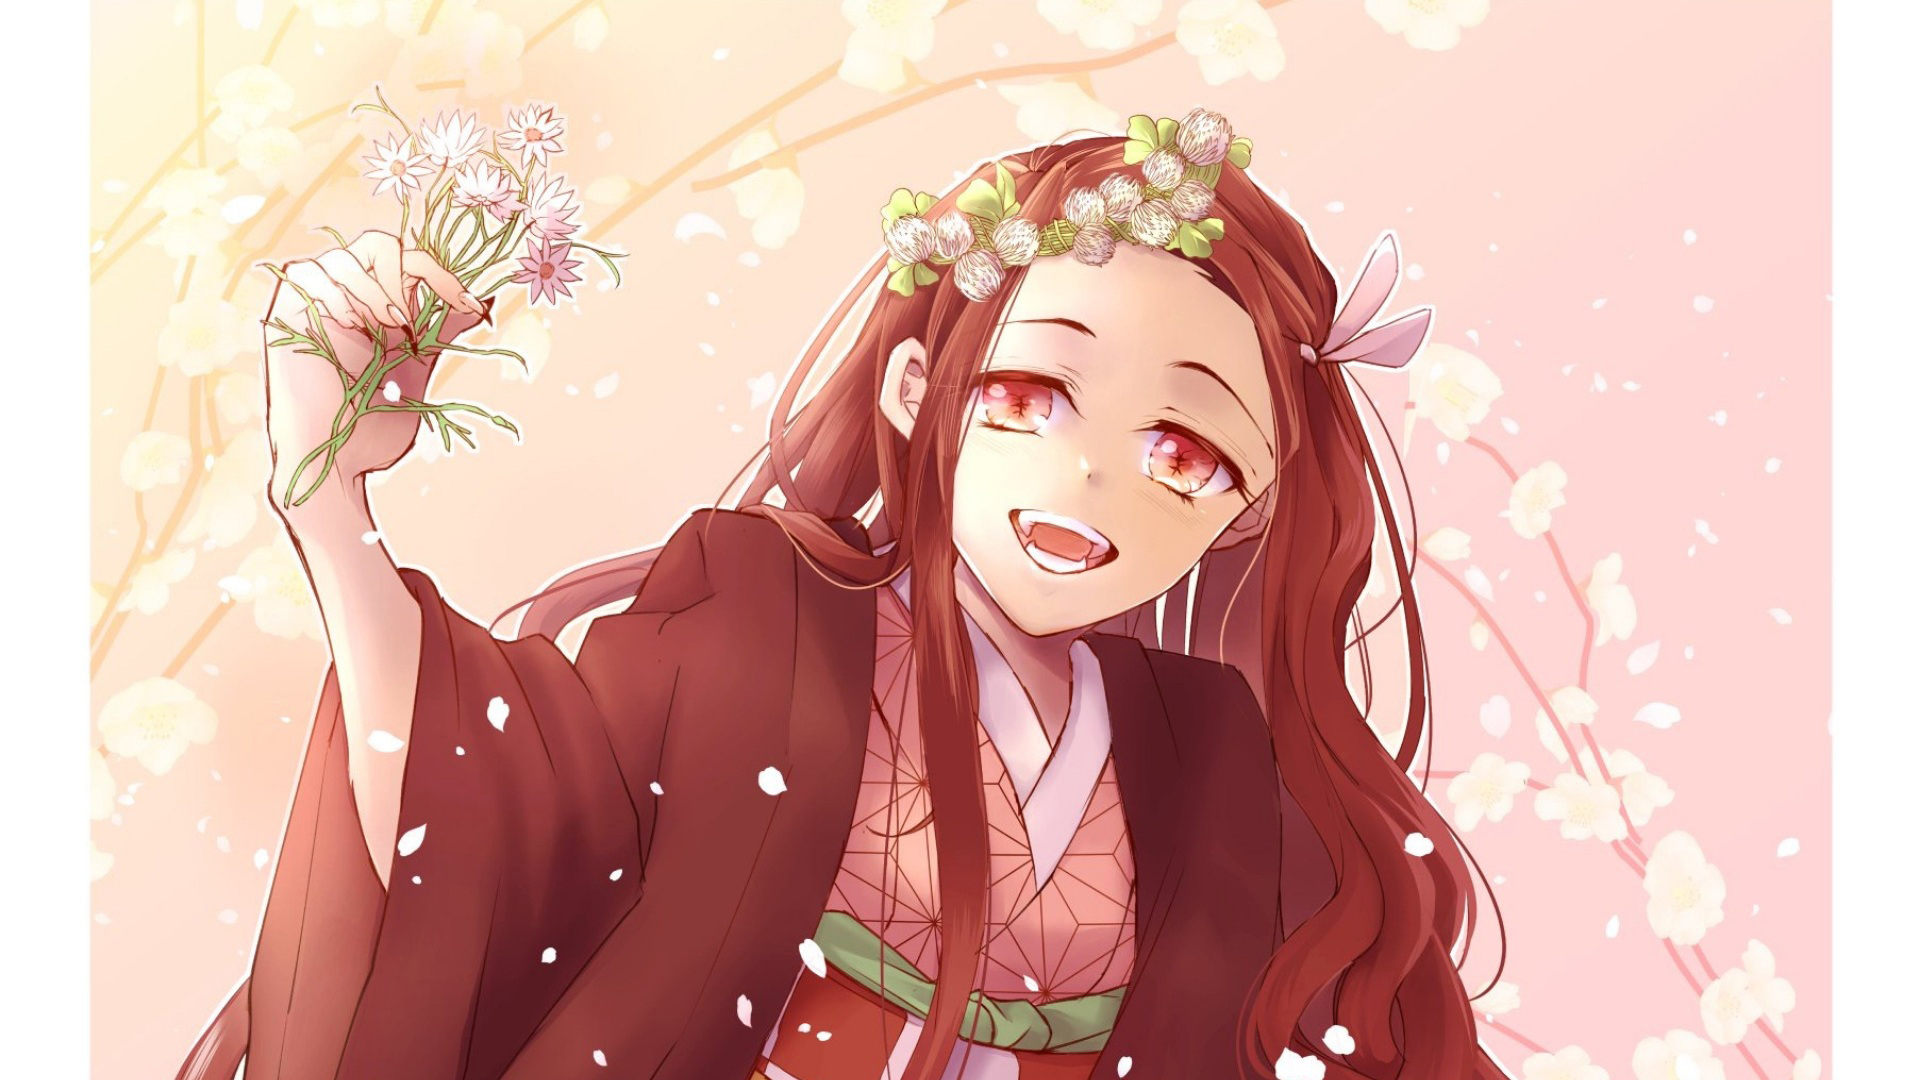 Demon Slayer Nezuko Kamado Having Flowers On Head And On Hand With Background Of Pink And Light Yellow HD Anime Wallpaper